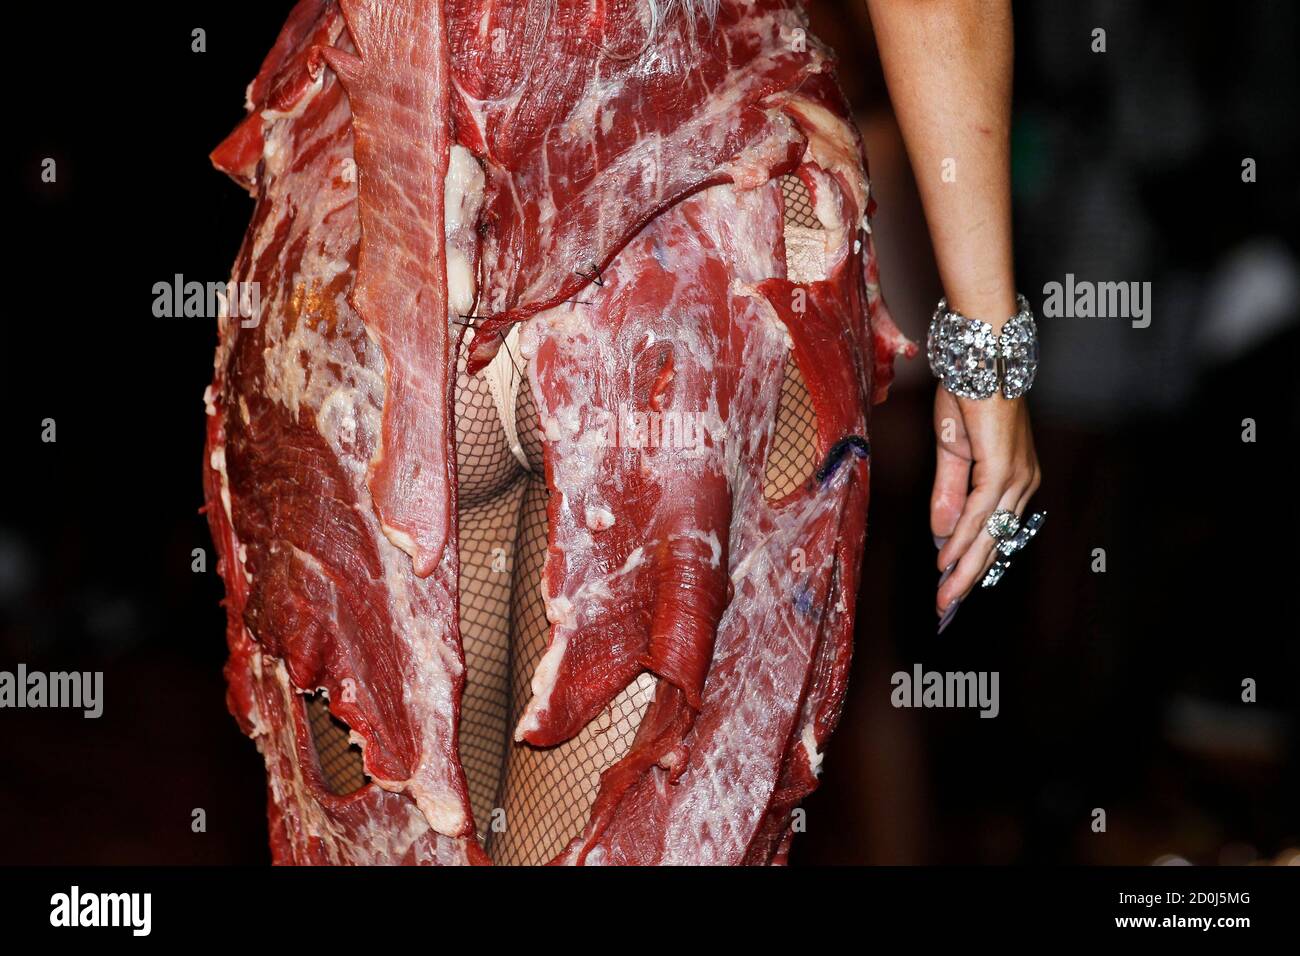 Lady Gaga Meat Dress High Resolution Stock Photography and Images - Alamy